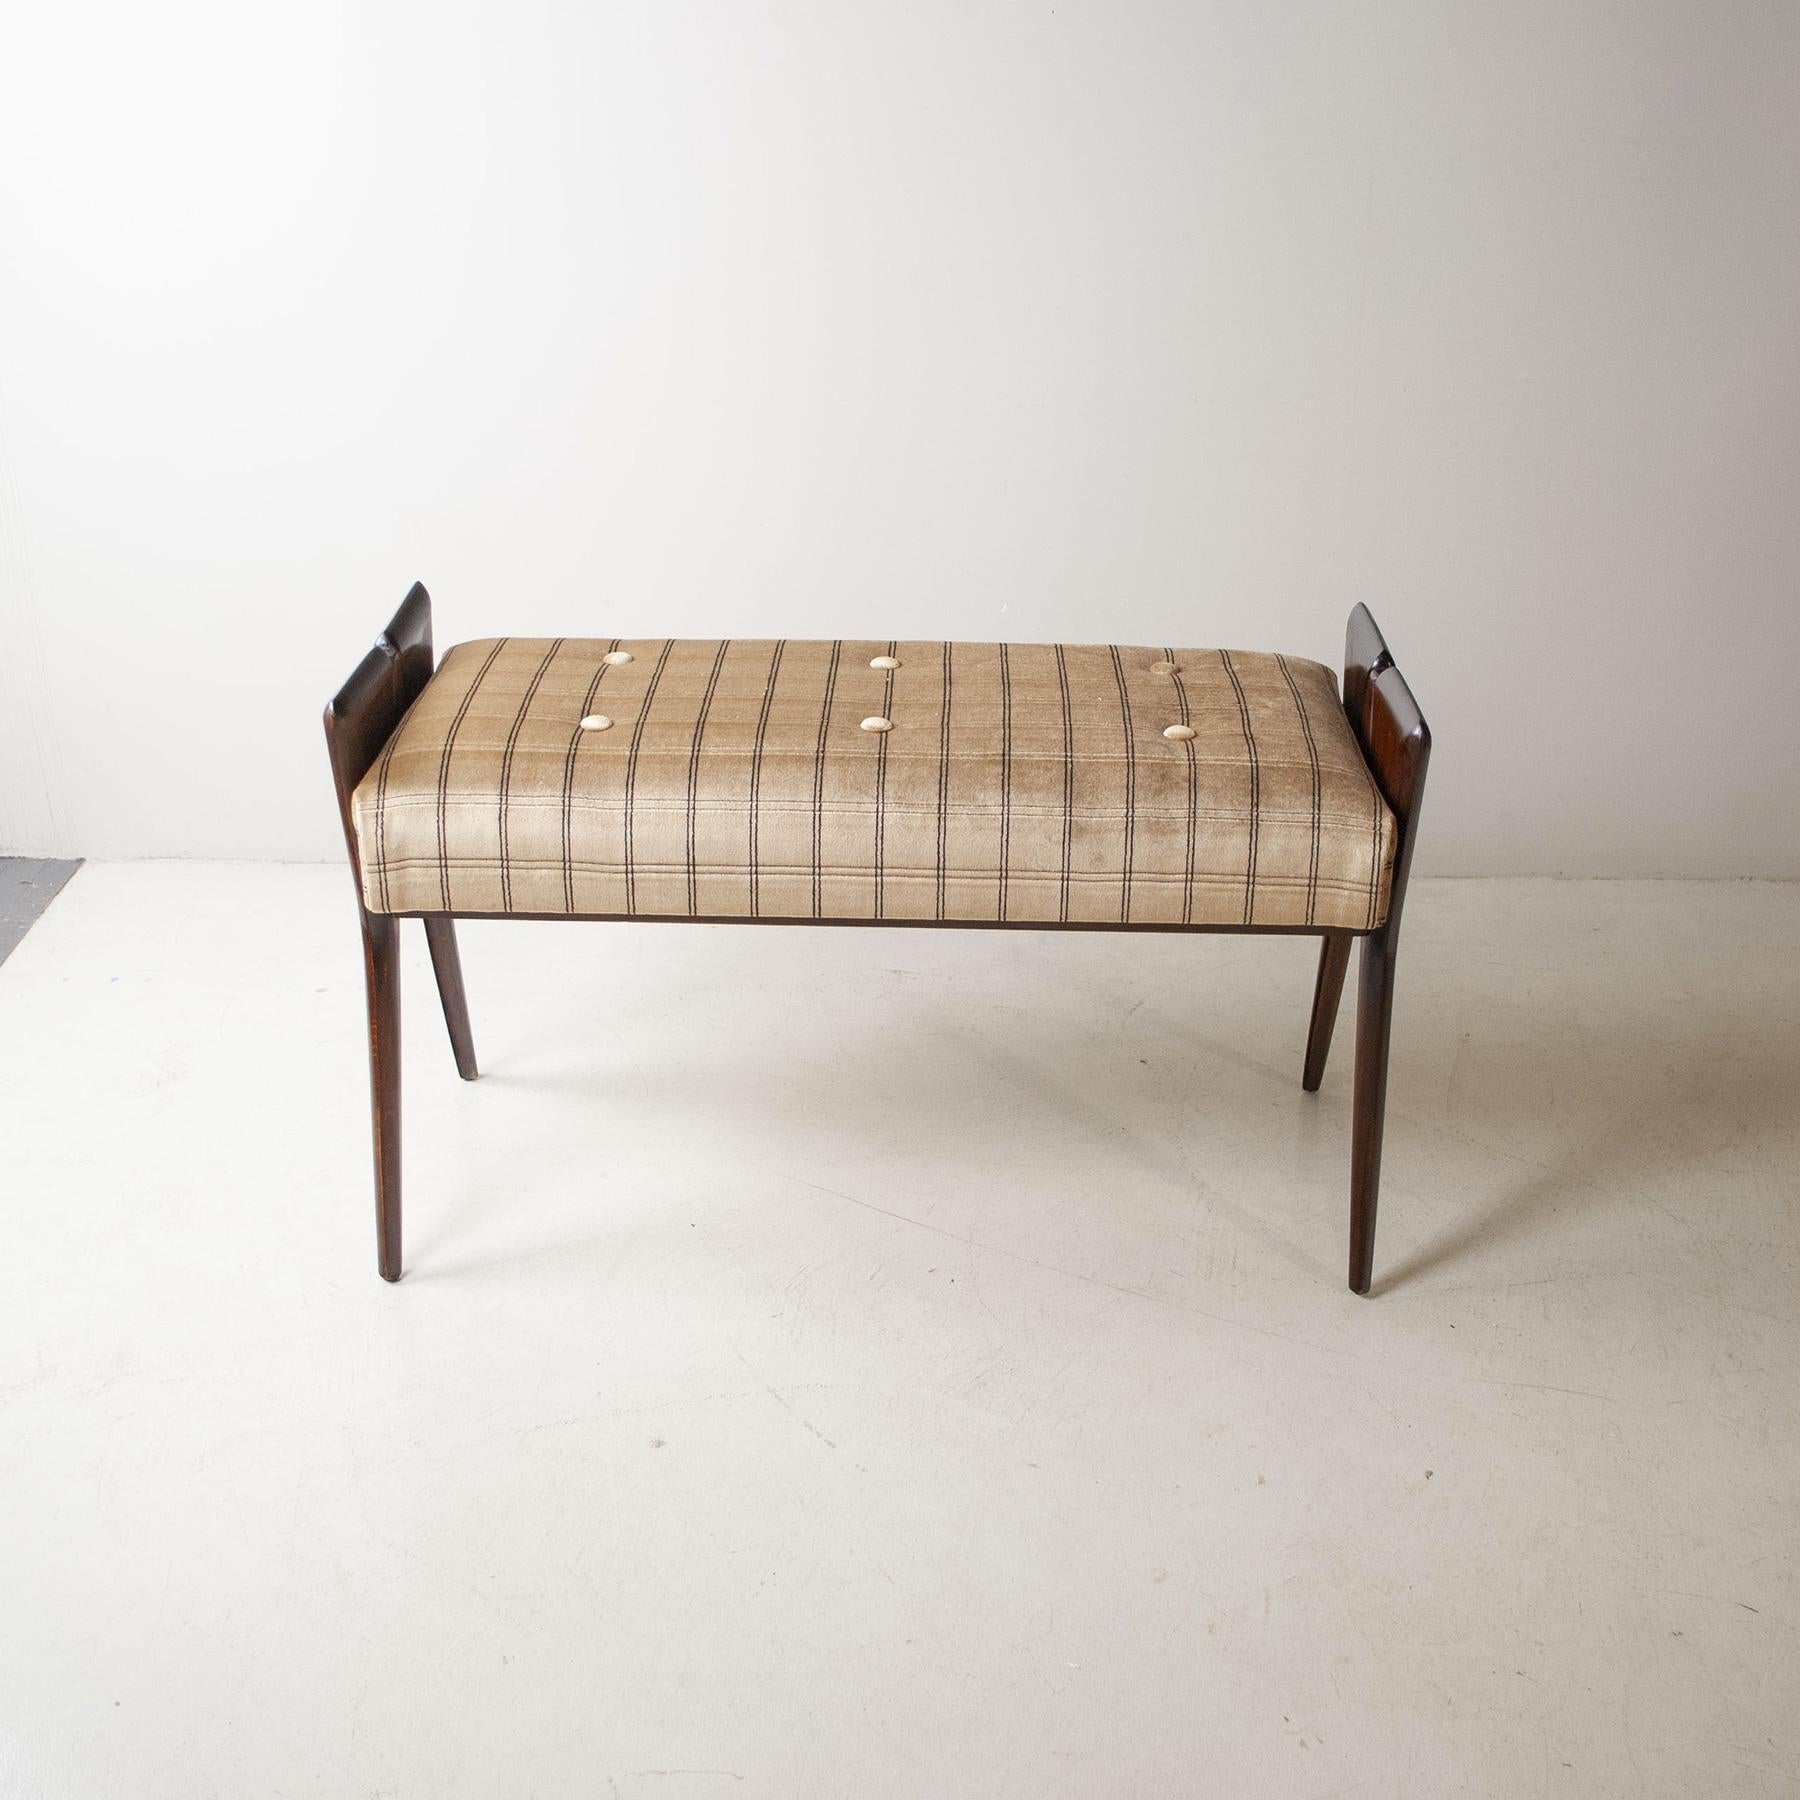 1950s wooden frame bench with velvet seat of the period in the style of Ico Parisi.

Ico Parisi was born in Palermo in 1916. He gained a diploma in construction and served his apprenticeship in Giuseppe Terragni's studio. In 1937 he carried out a